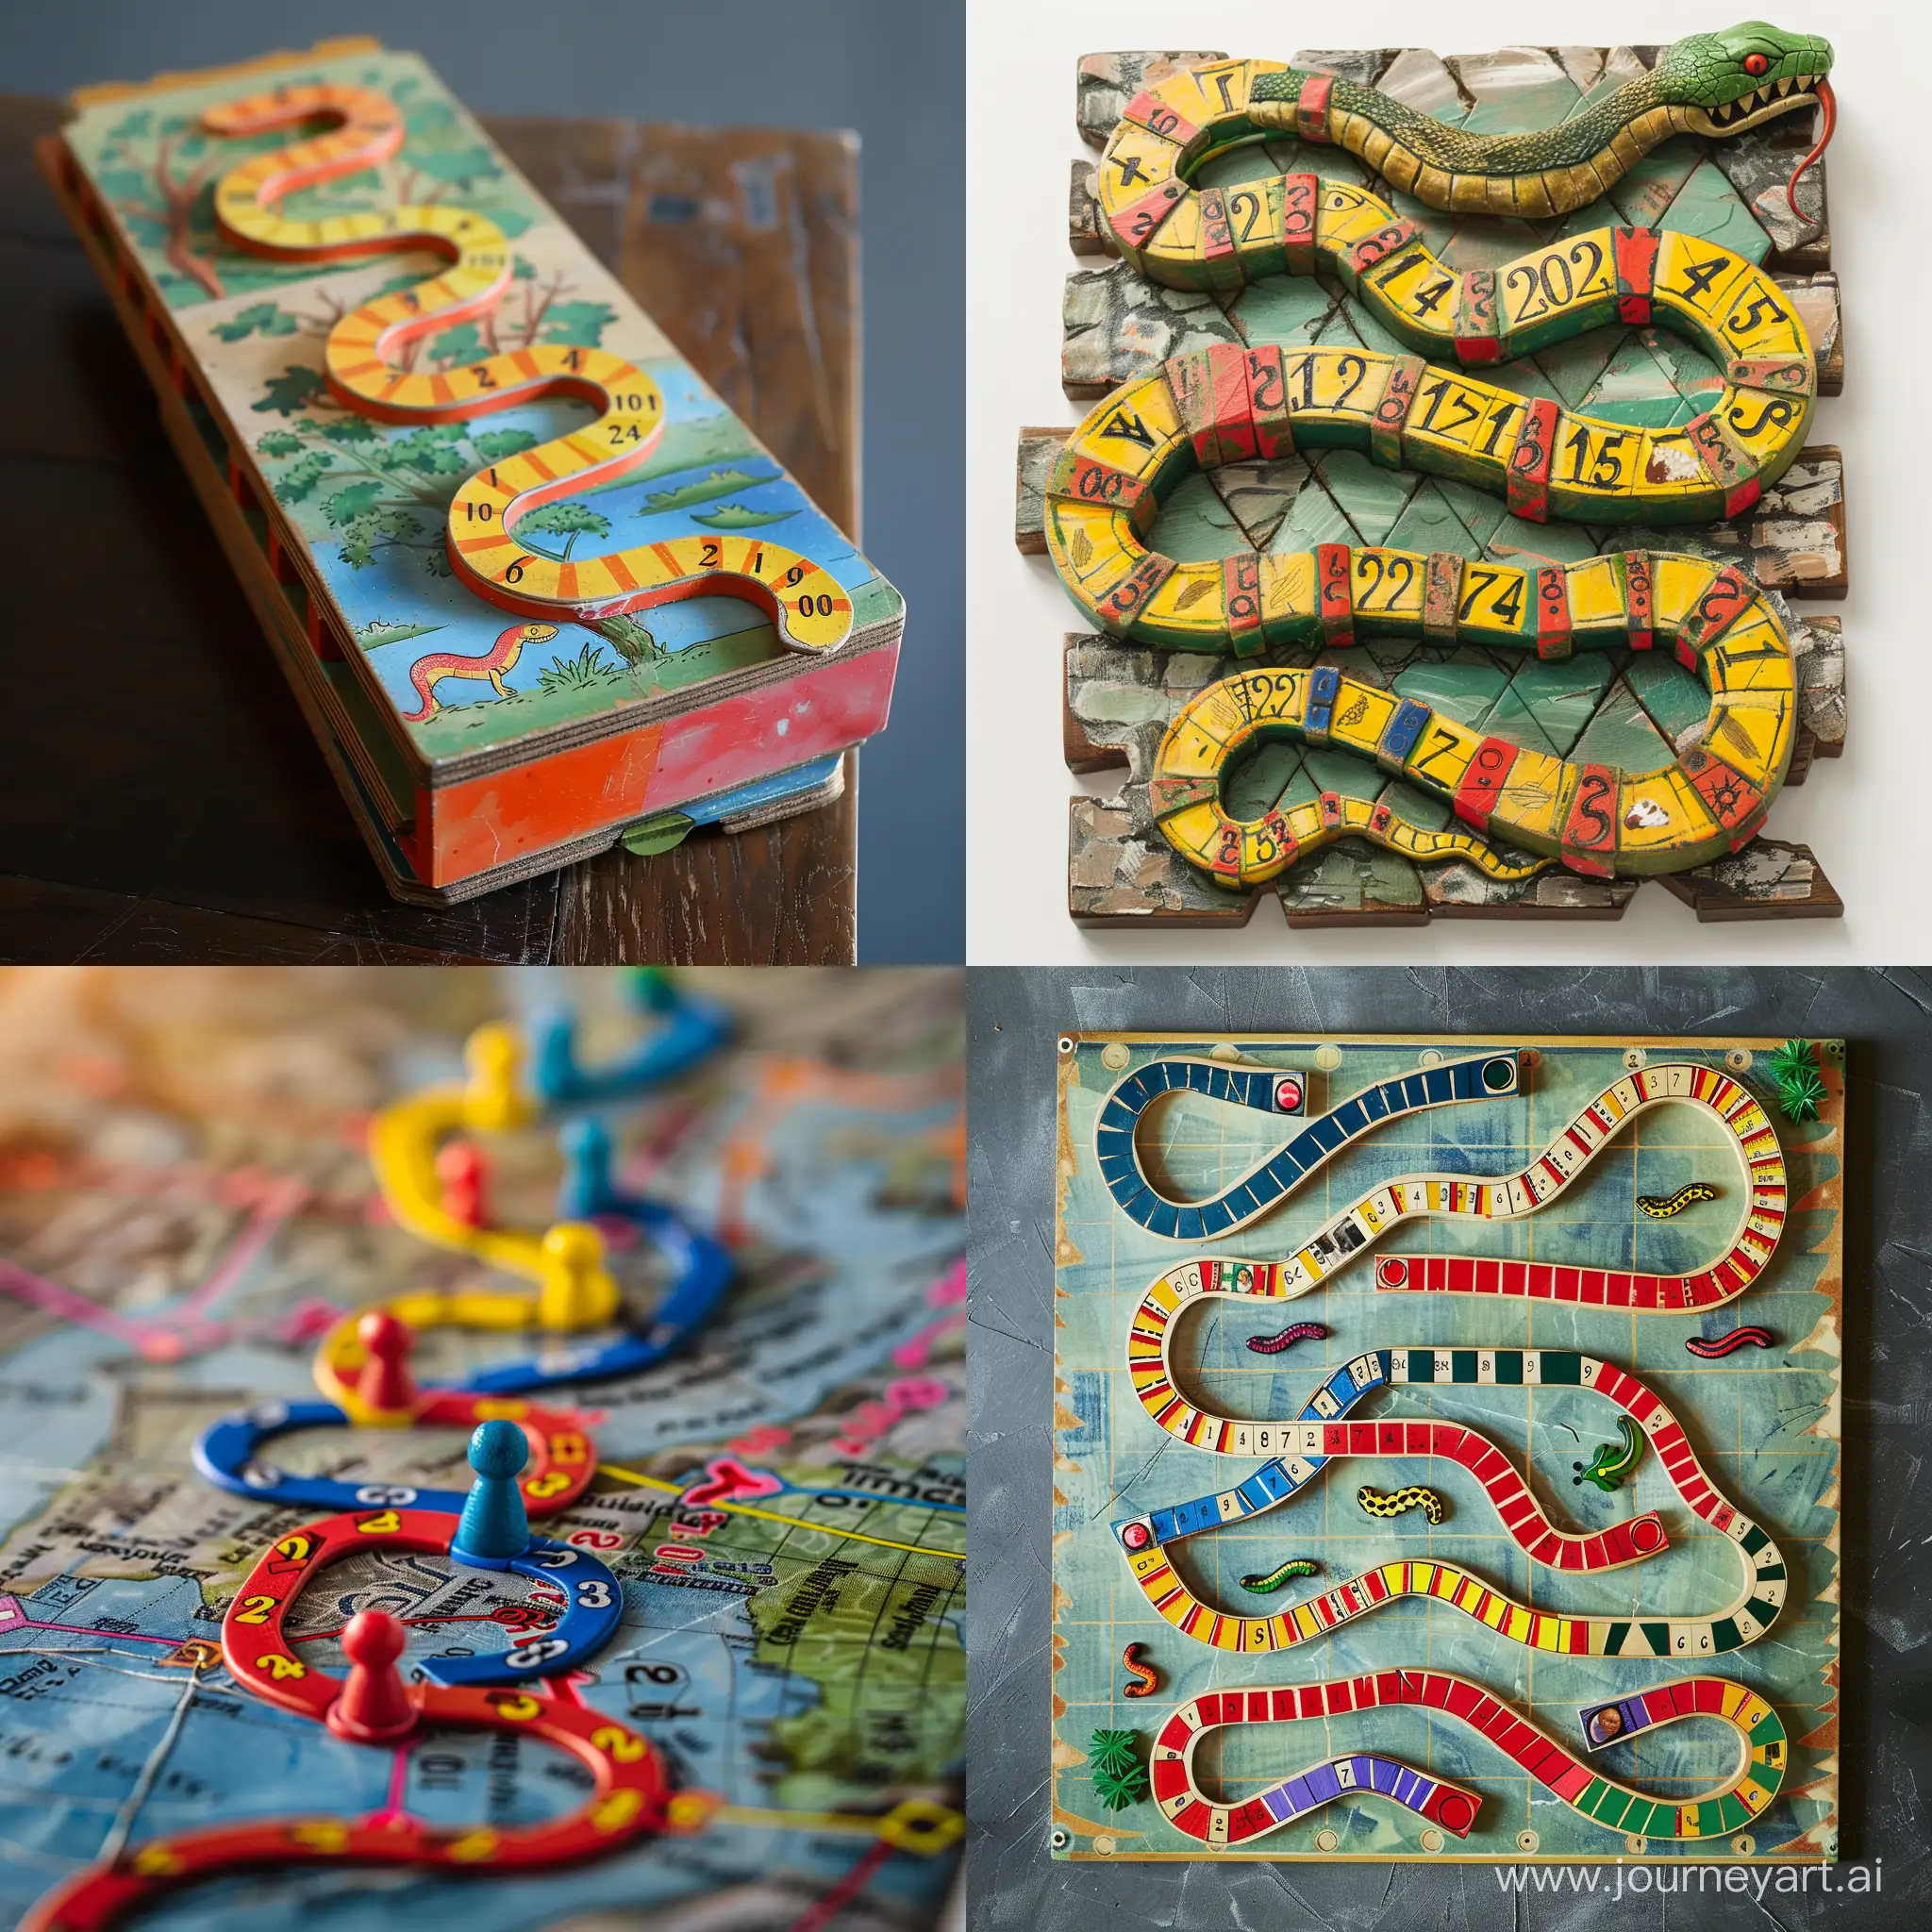 Evolution-of-Board-Game-40-Years-of-Ladders-and-Snakes-19842024